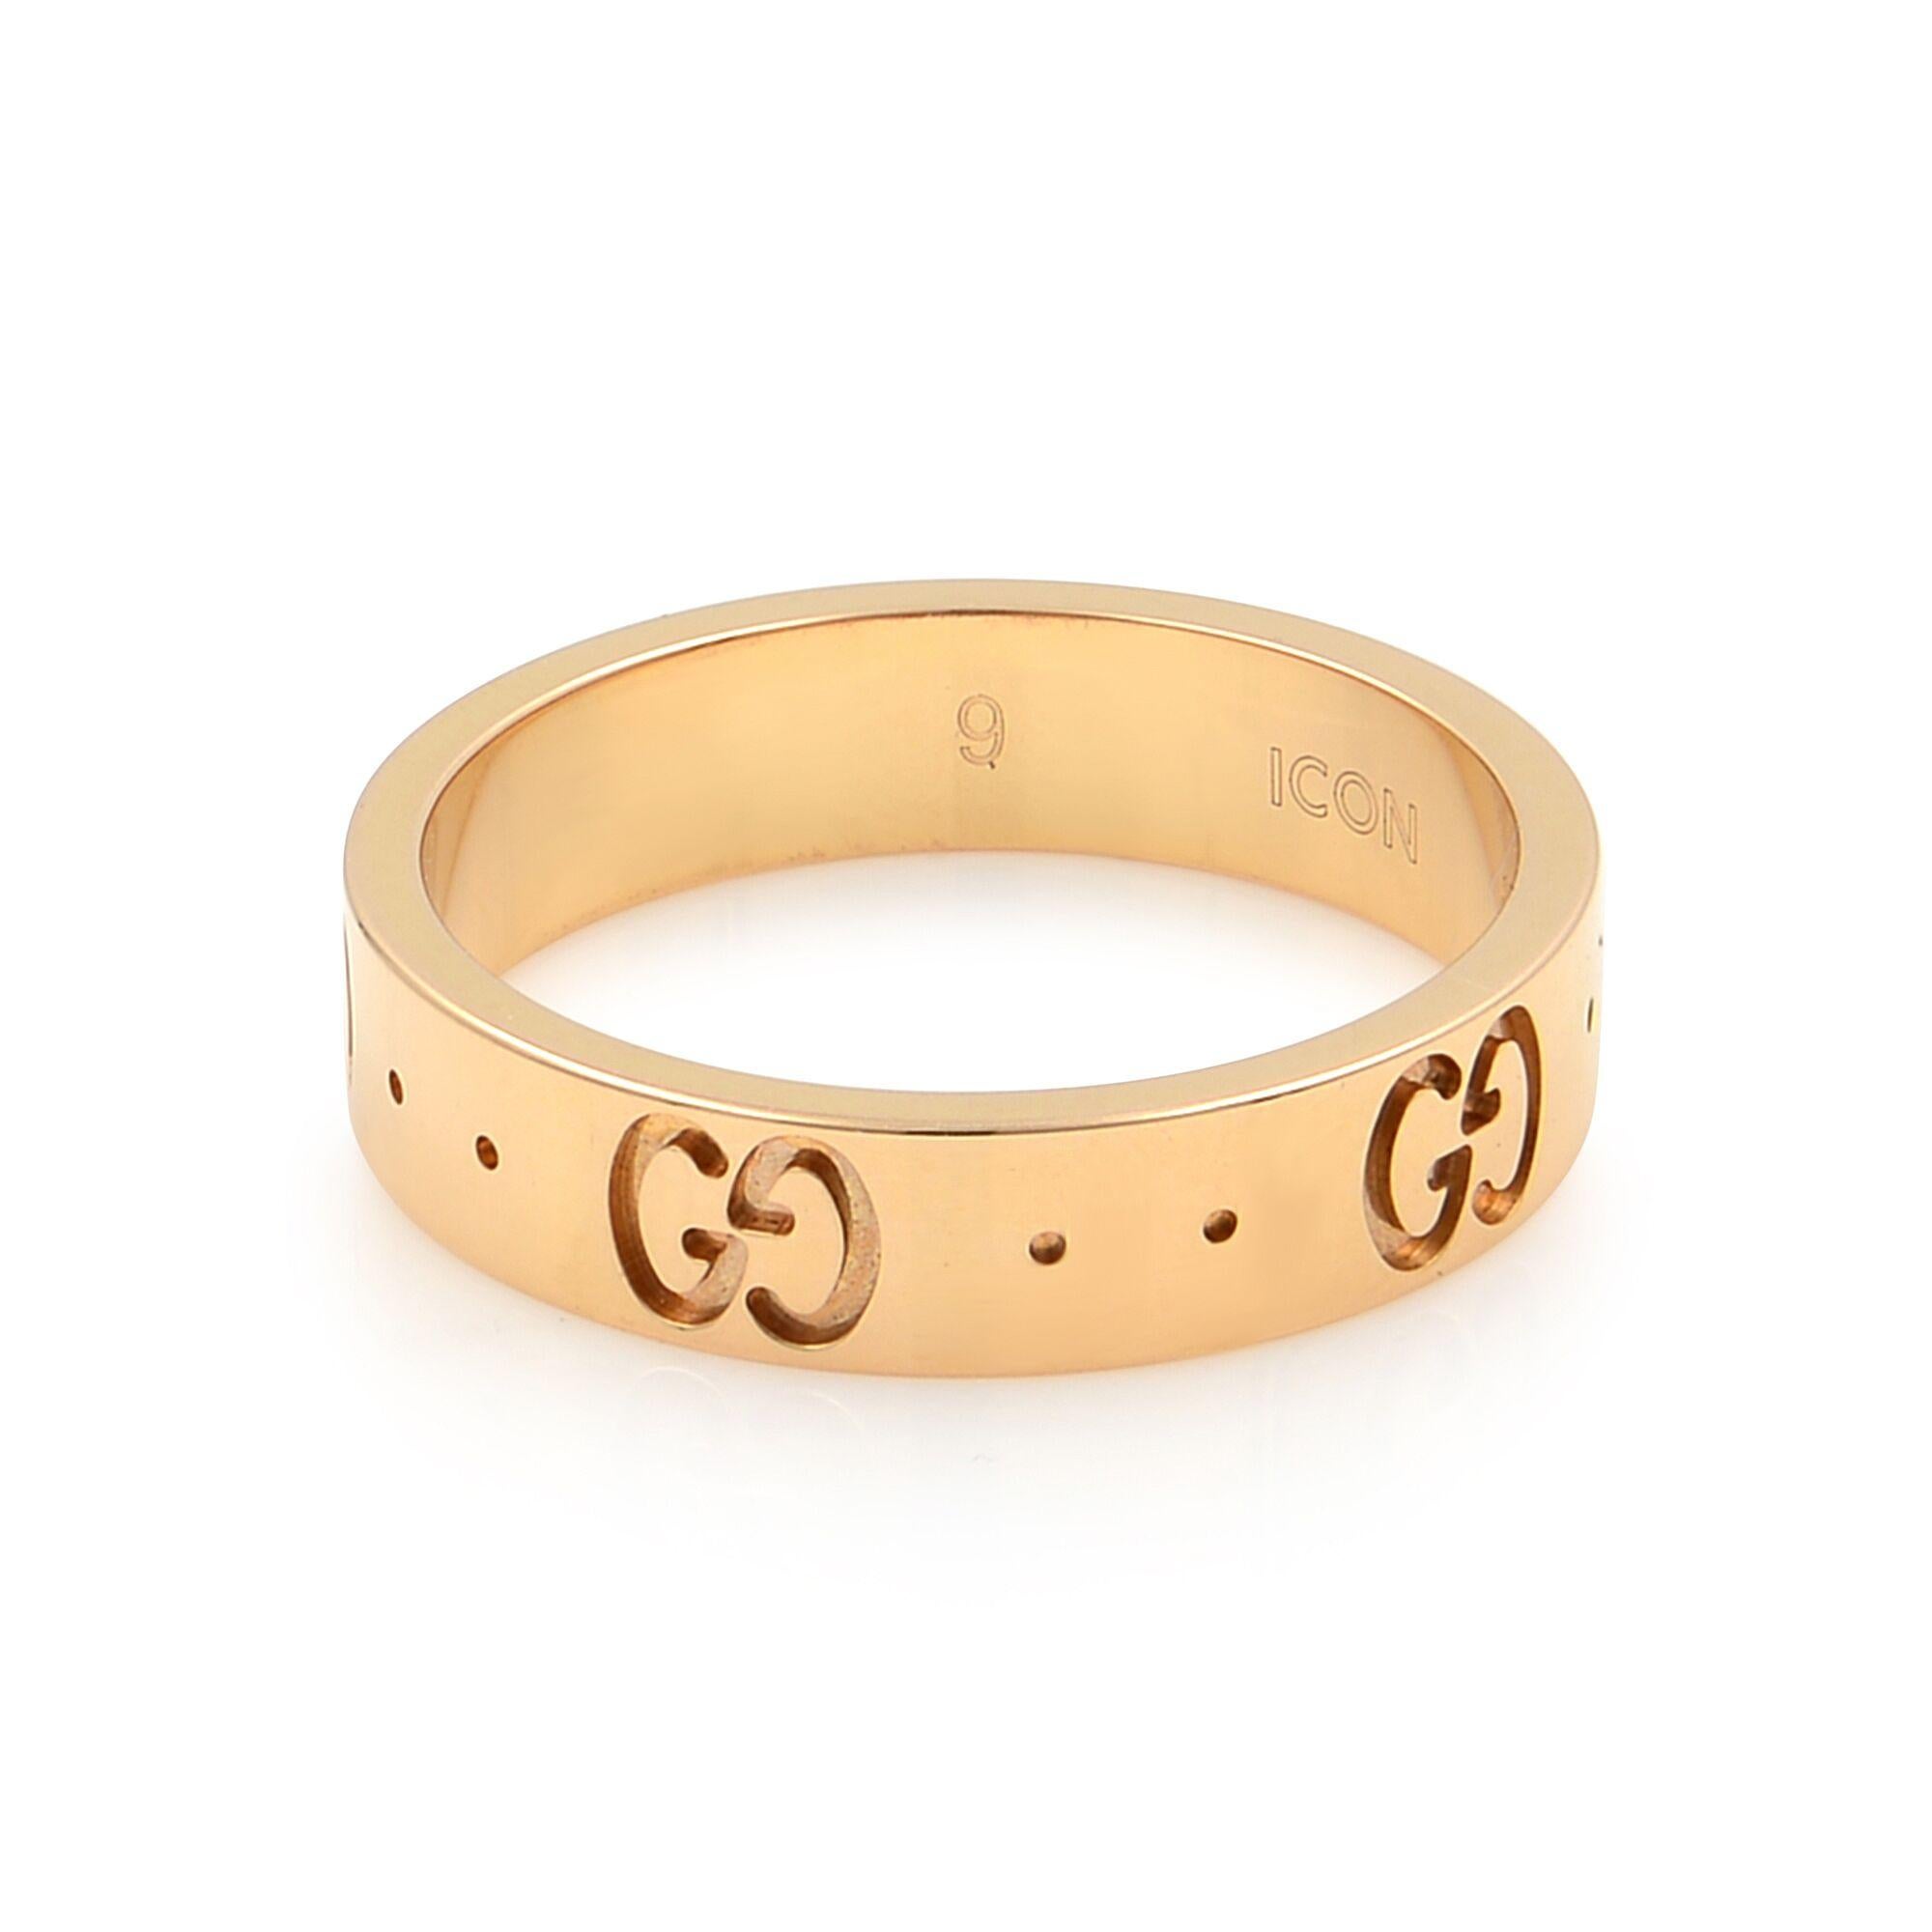 18K rose gold Gucci band. It is engraved with the Gucci logo all across the surface of the ring. High-polish finish gives way to the precision-drilled divets and logos.
Condition: Excellent (no signs of wear). 
Come without original packaging.